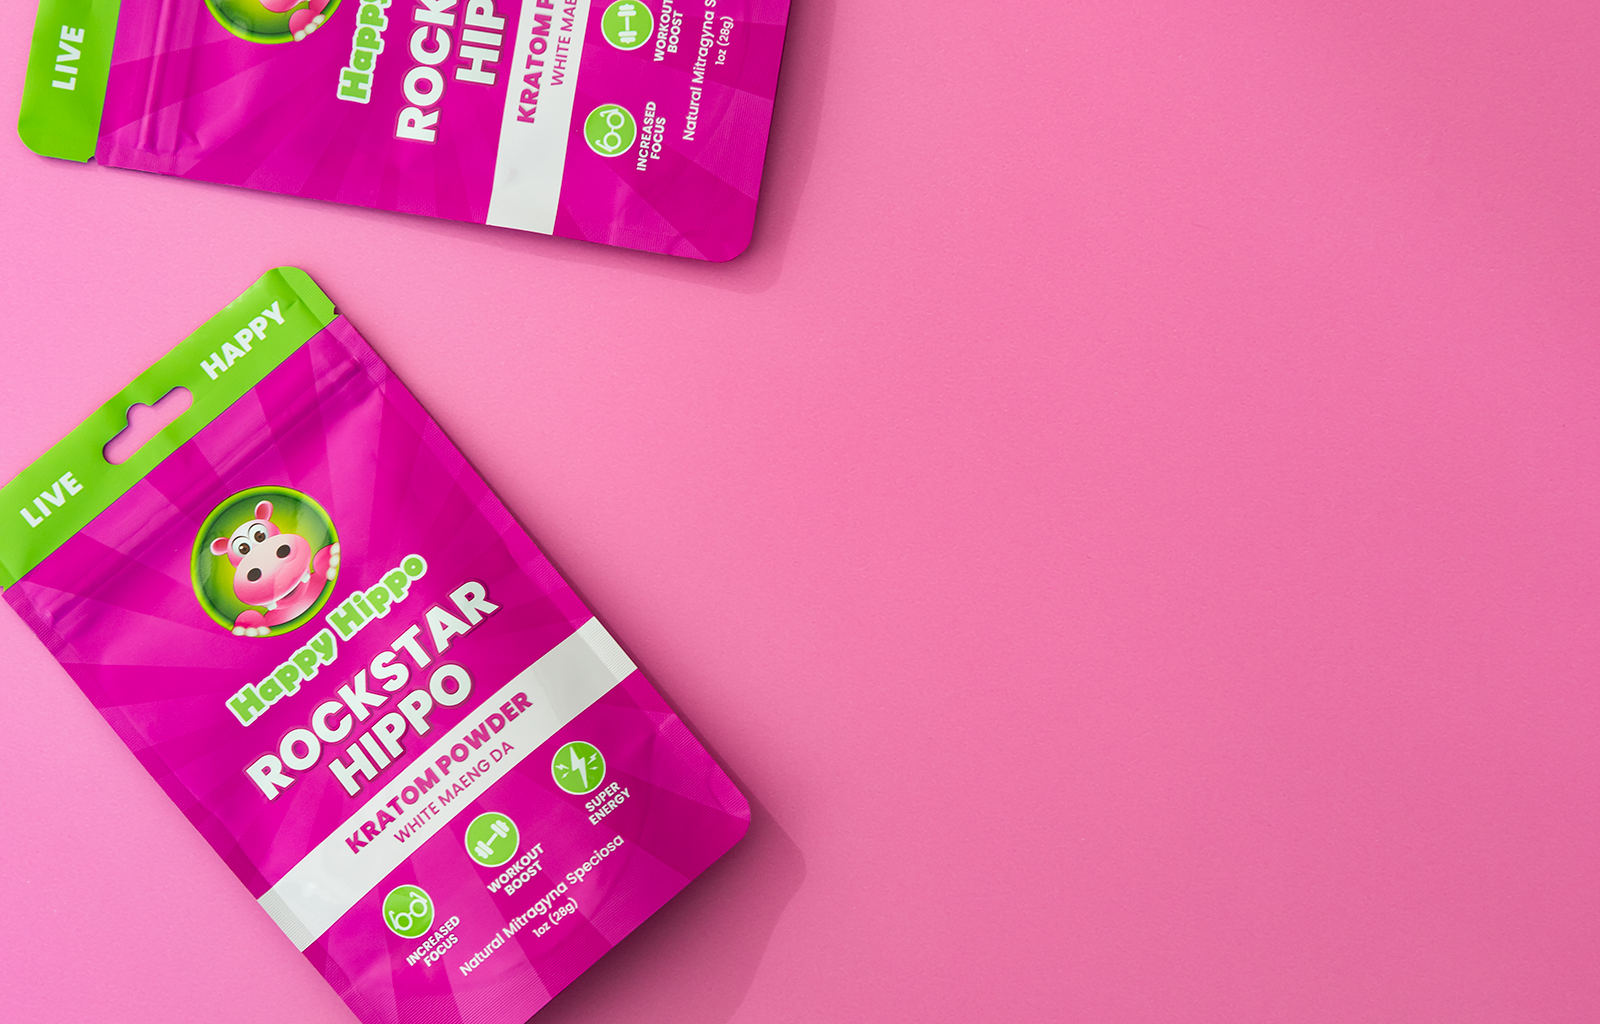 Featured Image depicting two 4oz packets of Happy Hippo branded kratom powder against a pink background.